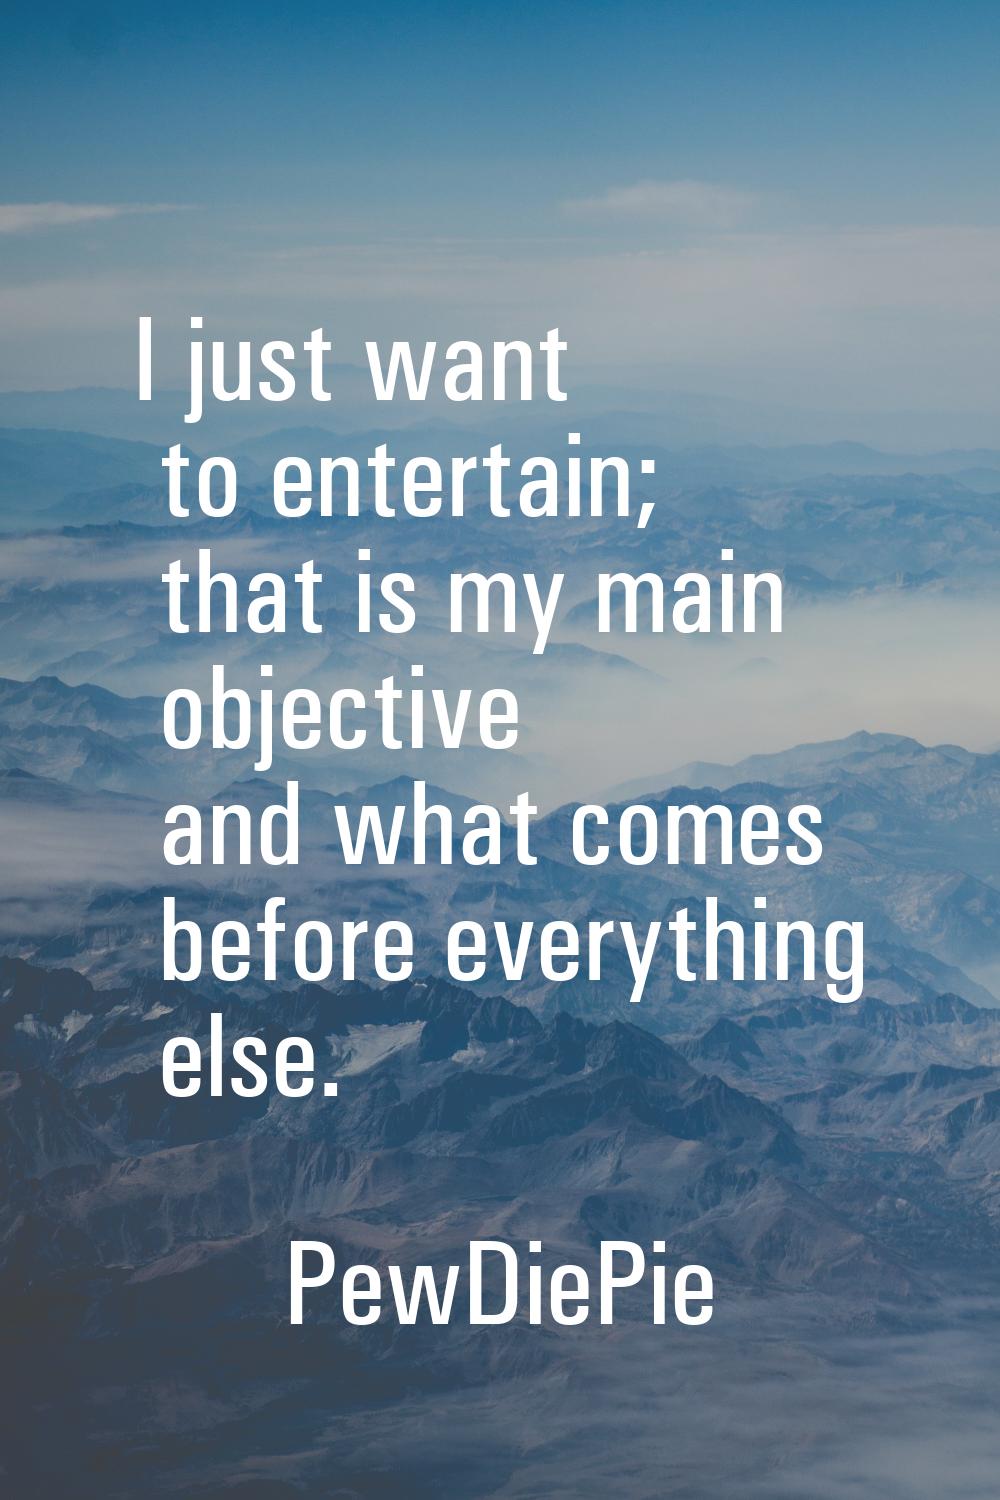 I just want to entertain; that is my main objective and what comes before everything else.